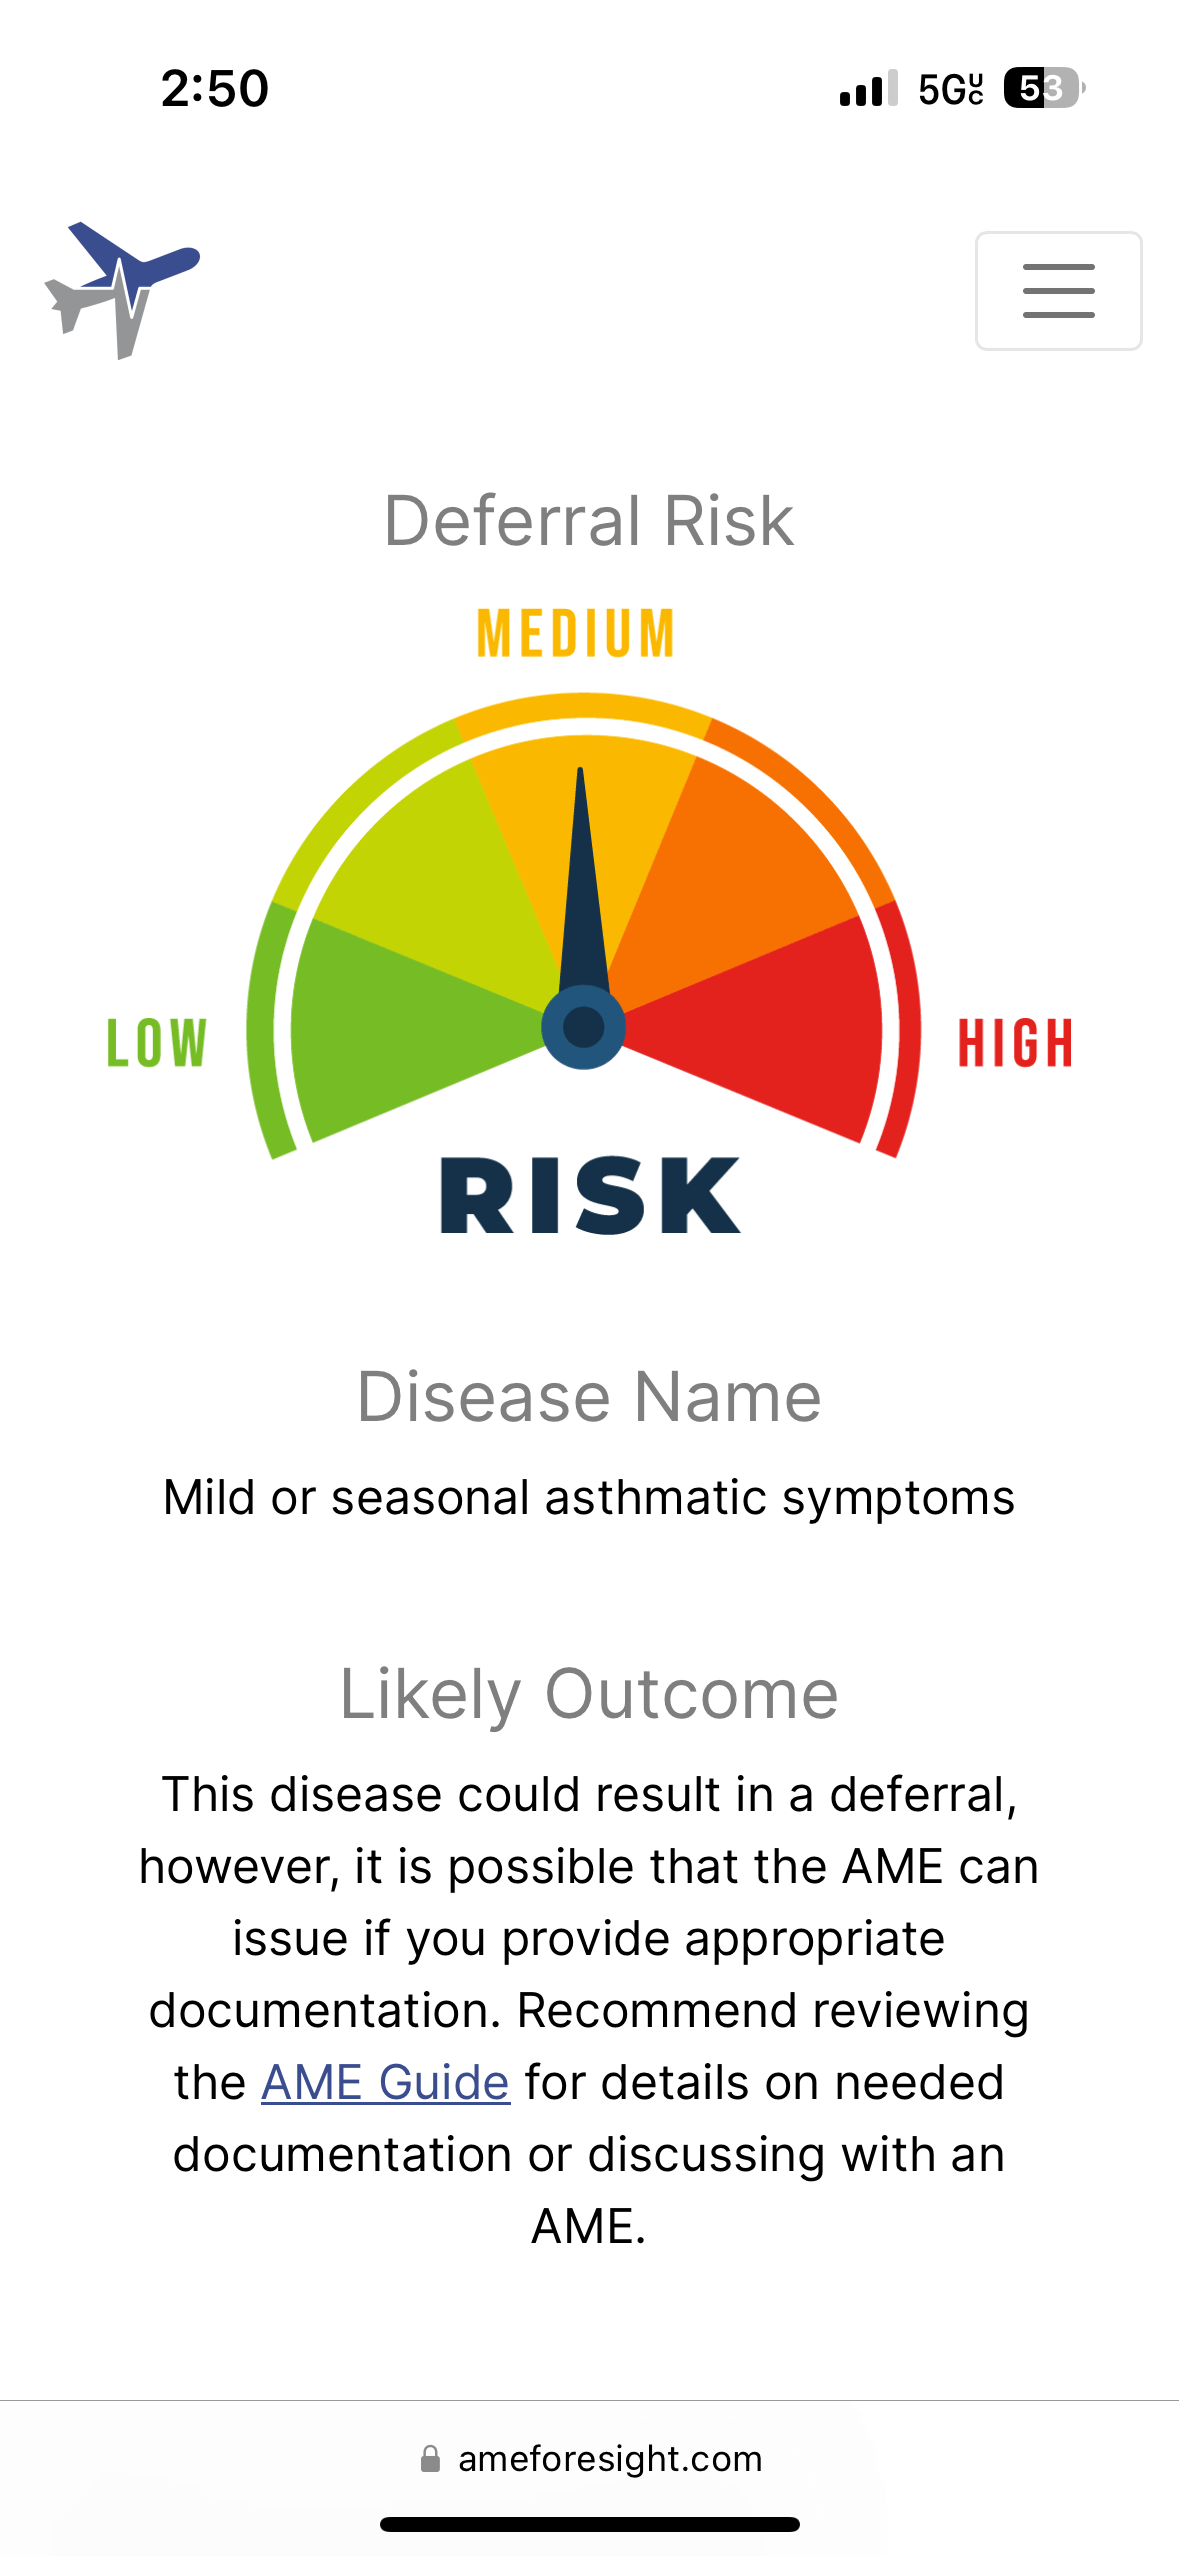 Image of risk visualization tool